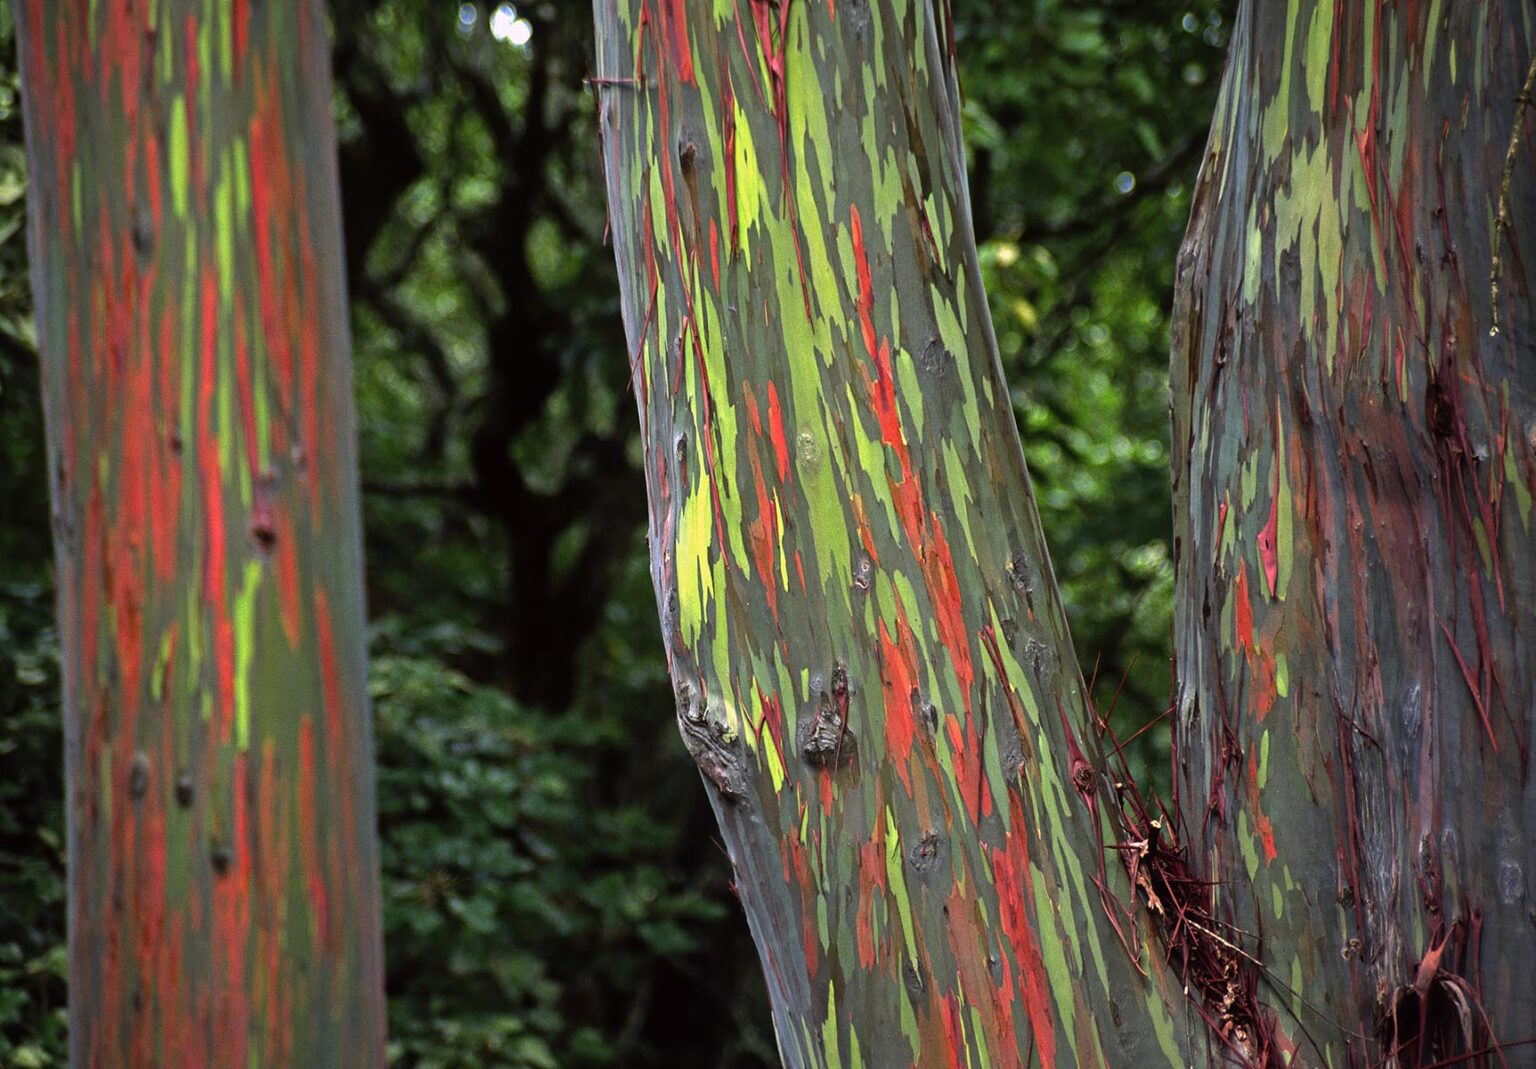 The green & red bark of the PAINTED EUCALYPTUS TREES (Eucalyptus deglupta) is one of natures incredible visual delights - MAUI, HAWAII